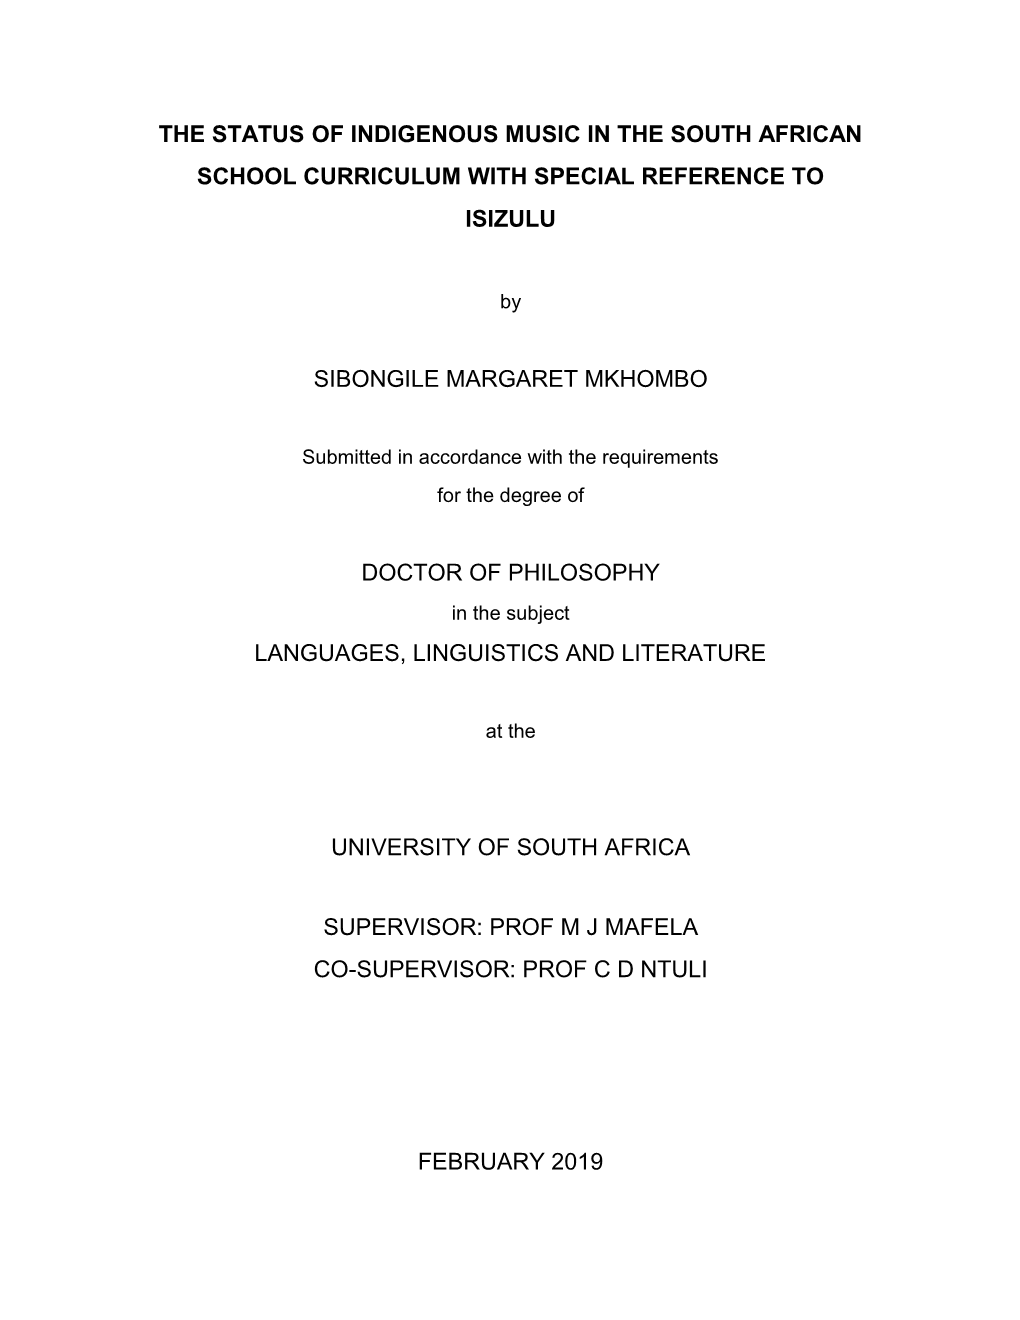 The Status of Indigenous Music in the South African School Curriculum with Special Reference to Isizulu